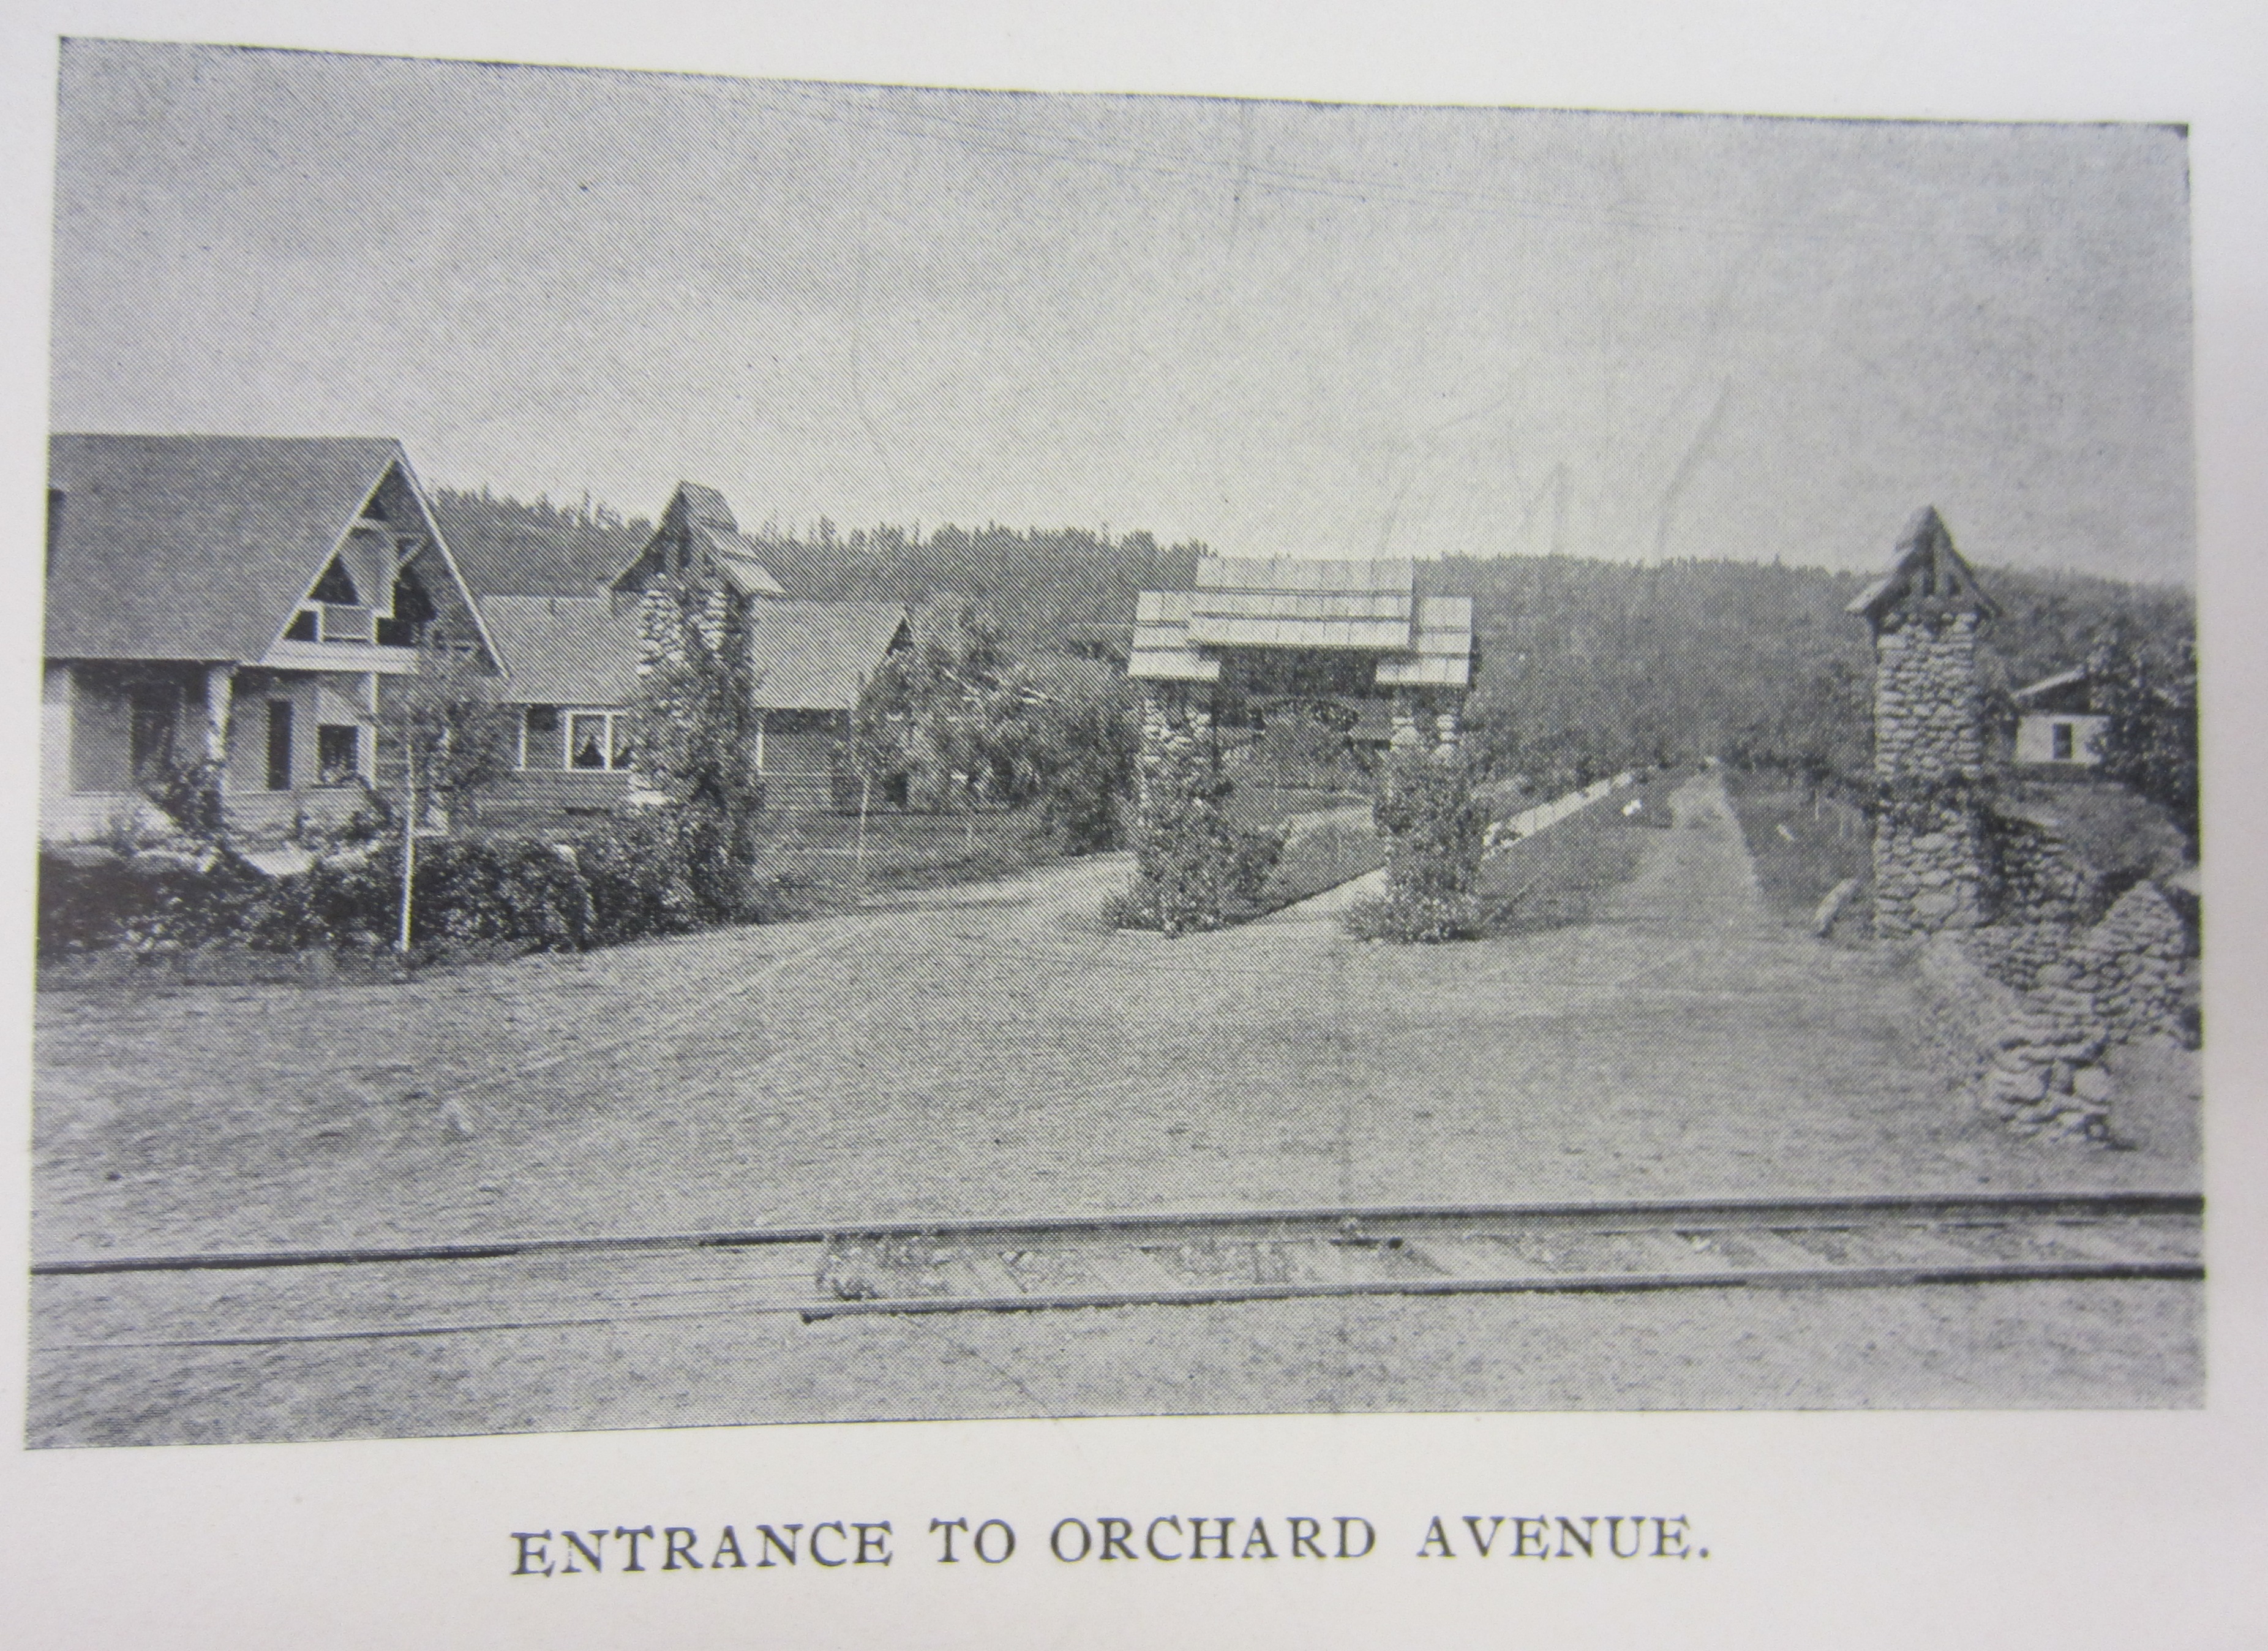 Entrance to Orchard Avenue